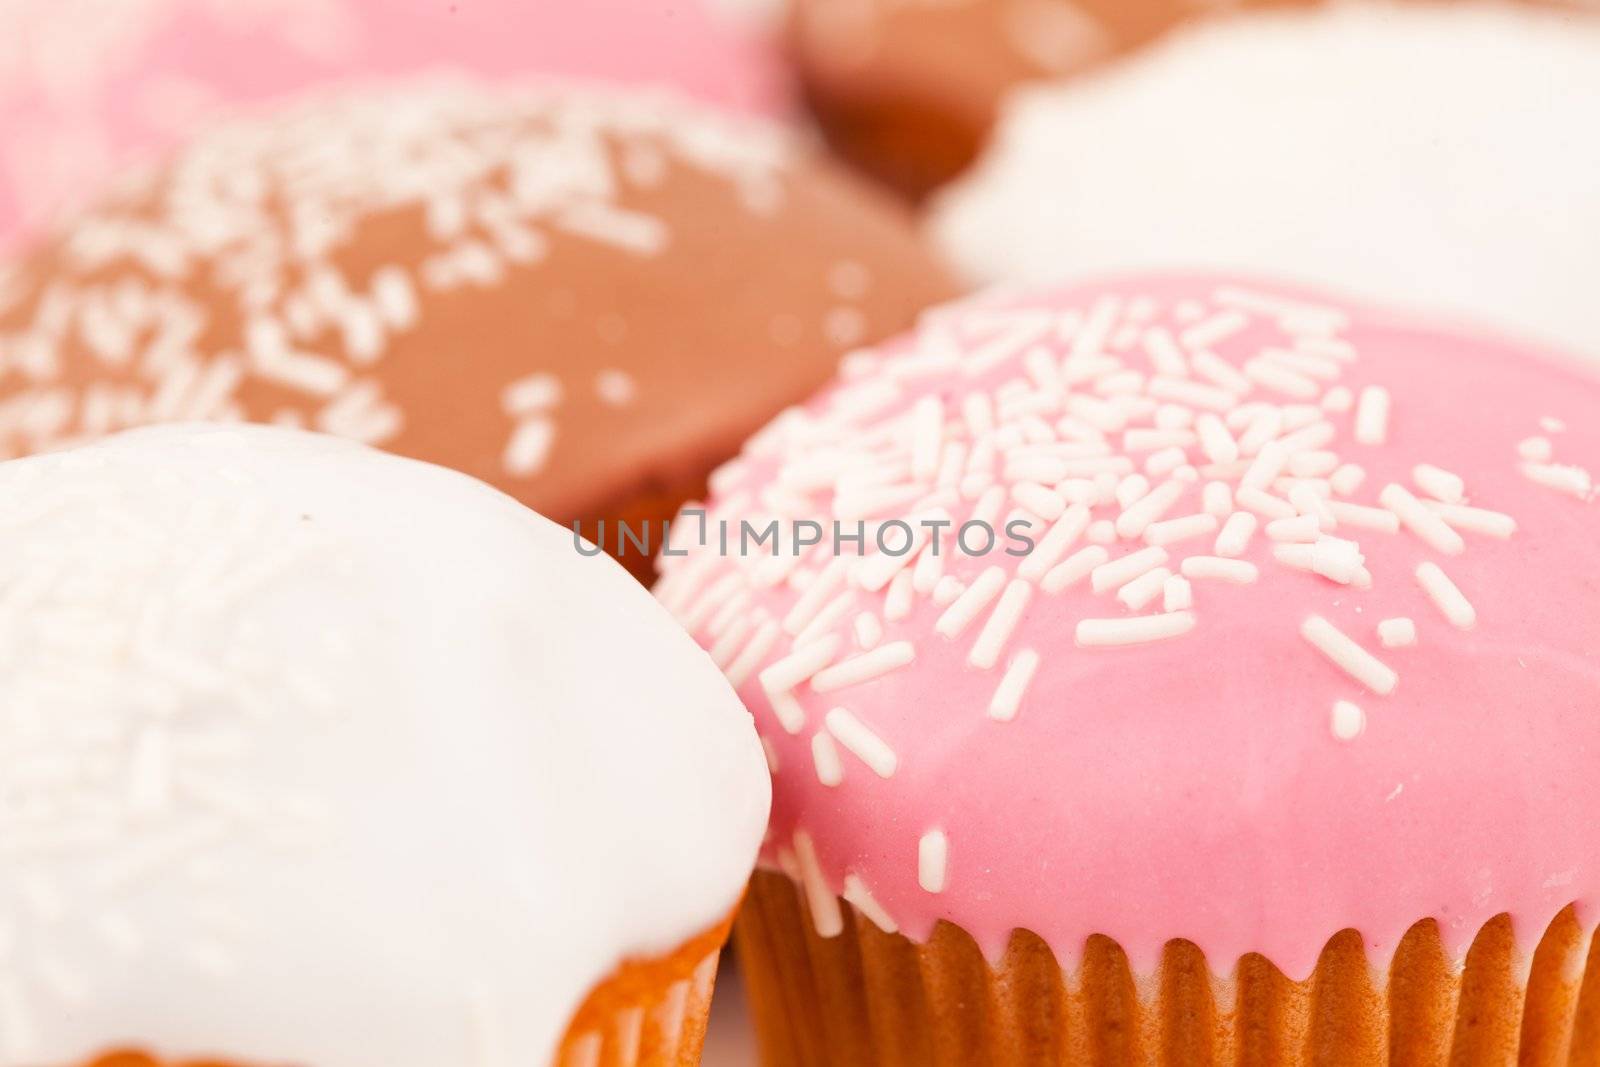 Many muffins with icing sugar against a white background